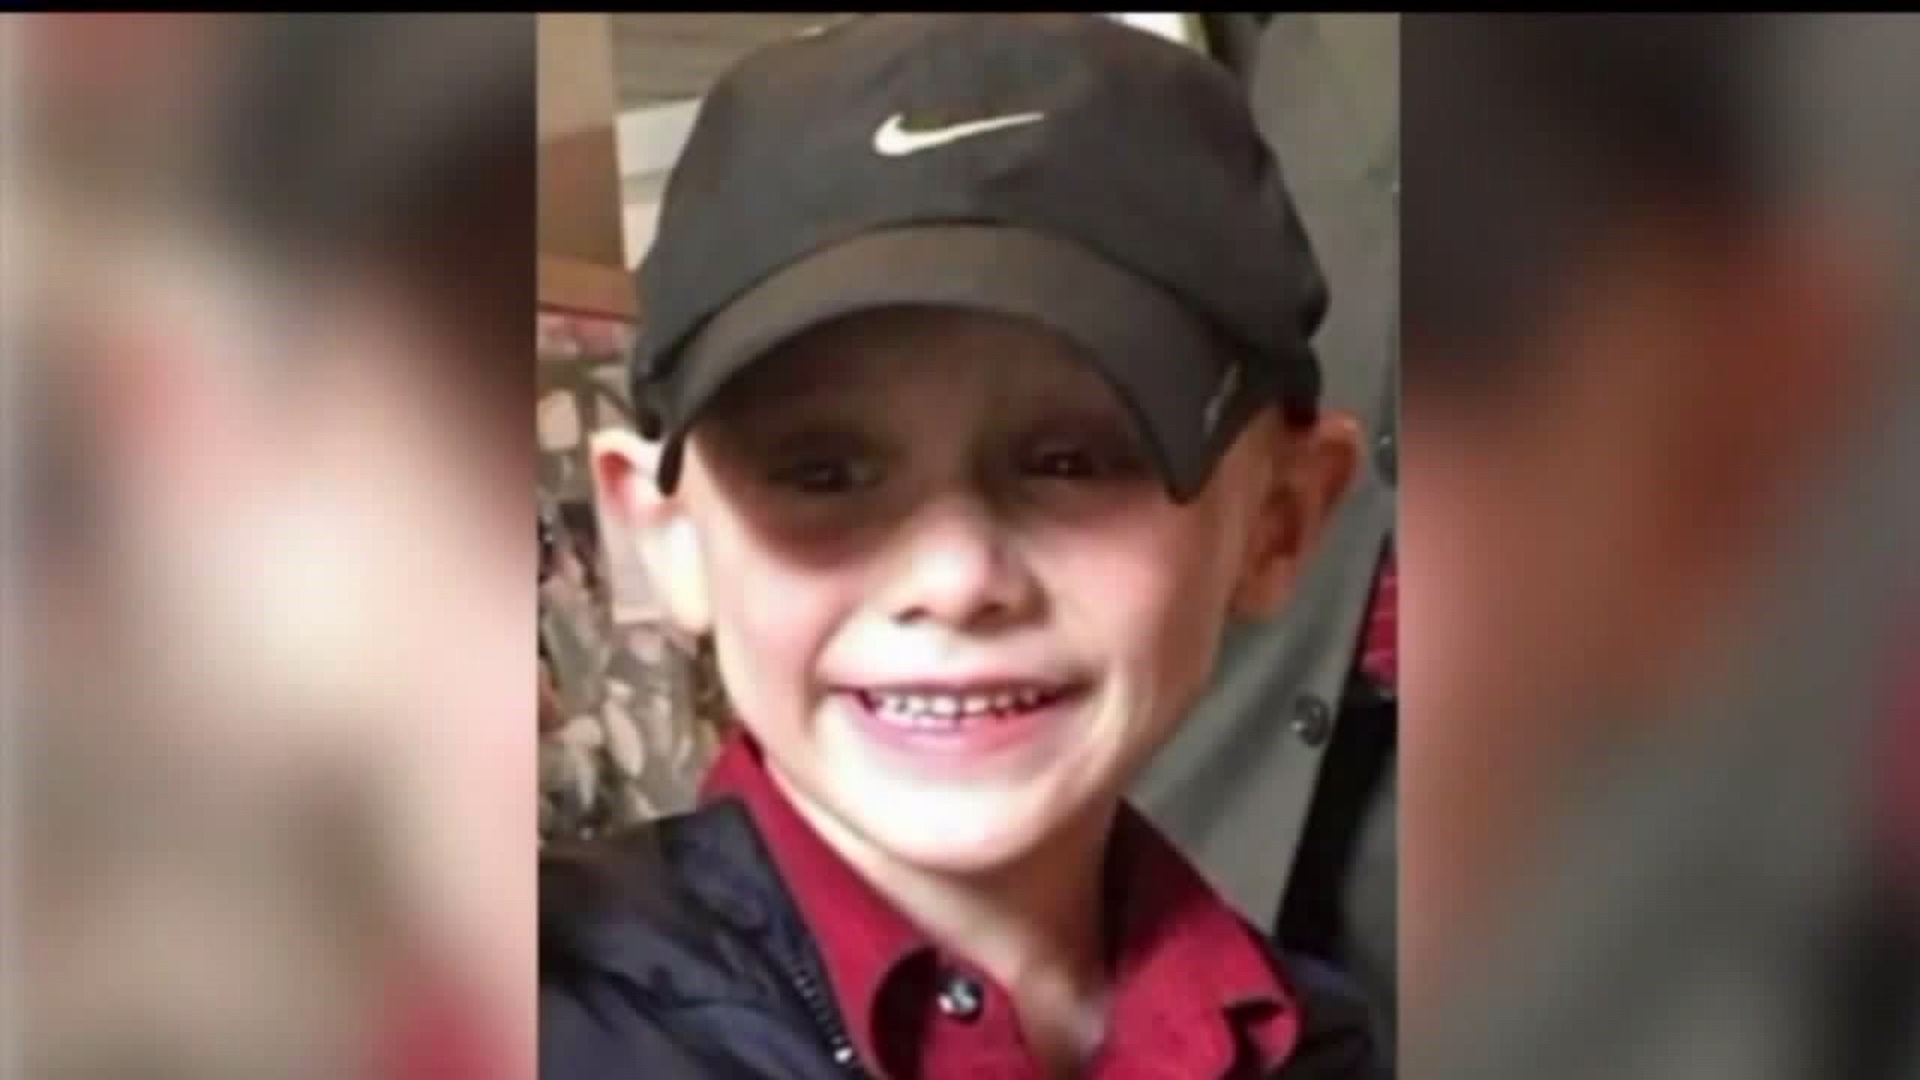 Search for missing Illinois boy continues